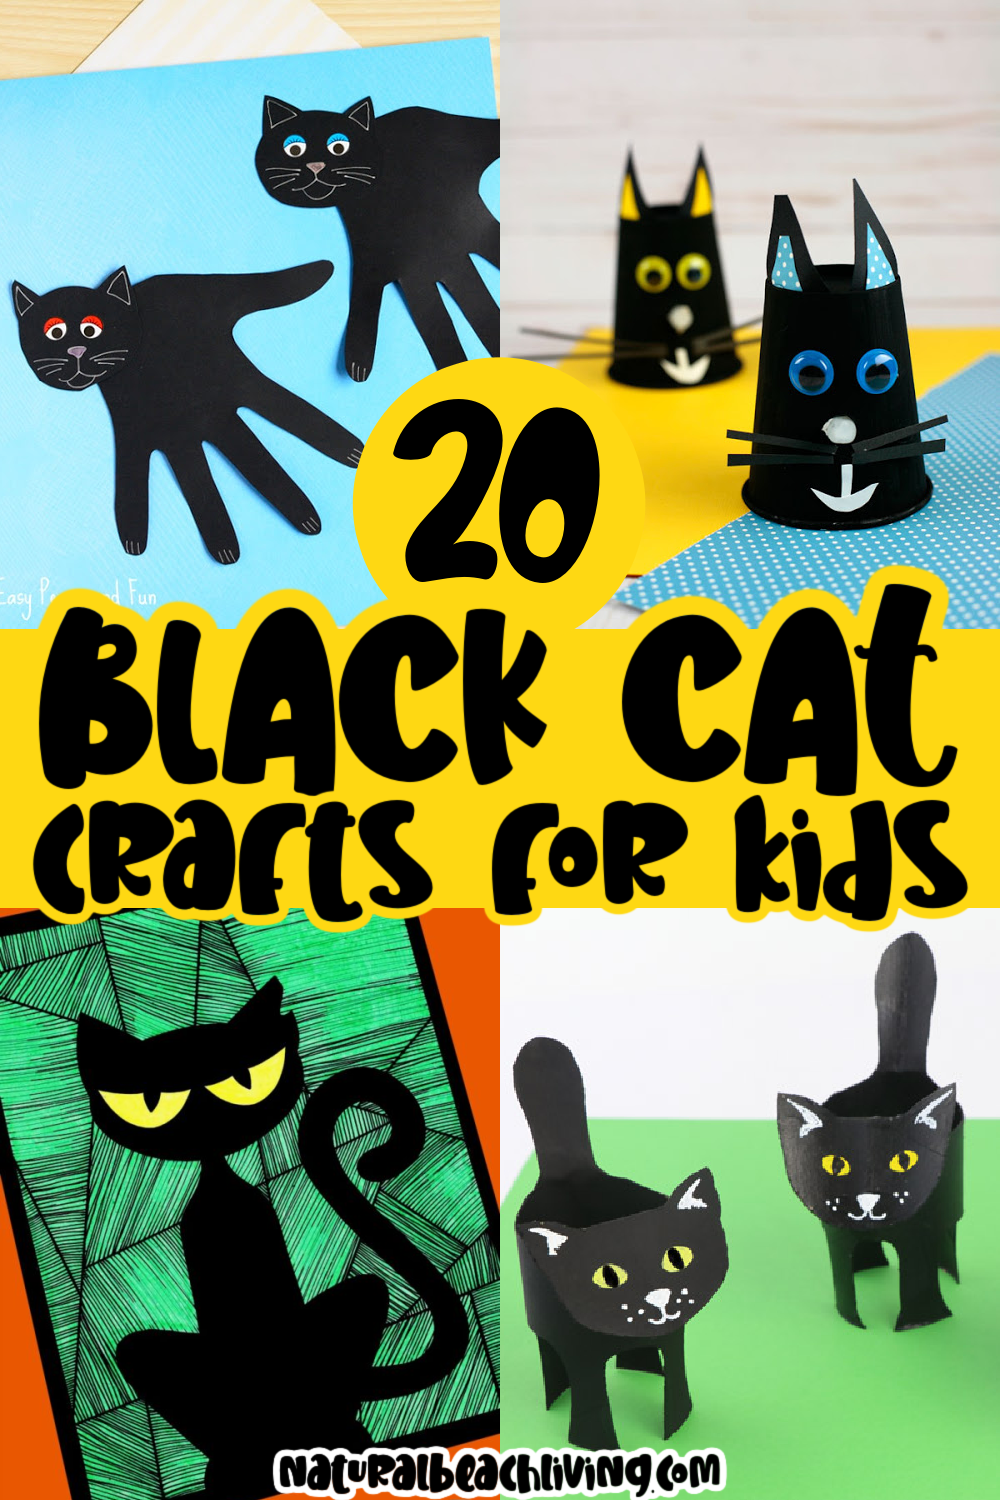 20 Black Cat Crafts: From Halloween Cats Crafts made with paper plates and toilet paper rolls to cute black cat wreaths and fun printable crafts, you will find something with feline flair that your kids will enjoy. The Best Fall Activities and Halloween Activities for Kids